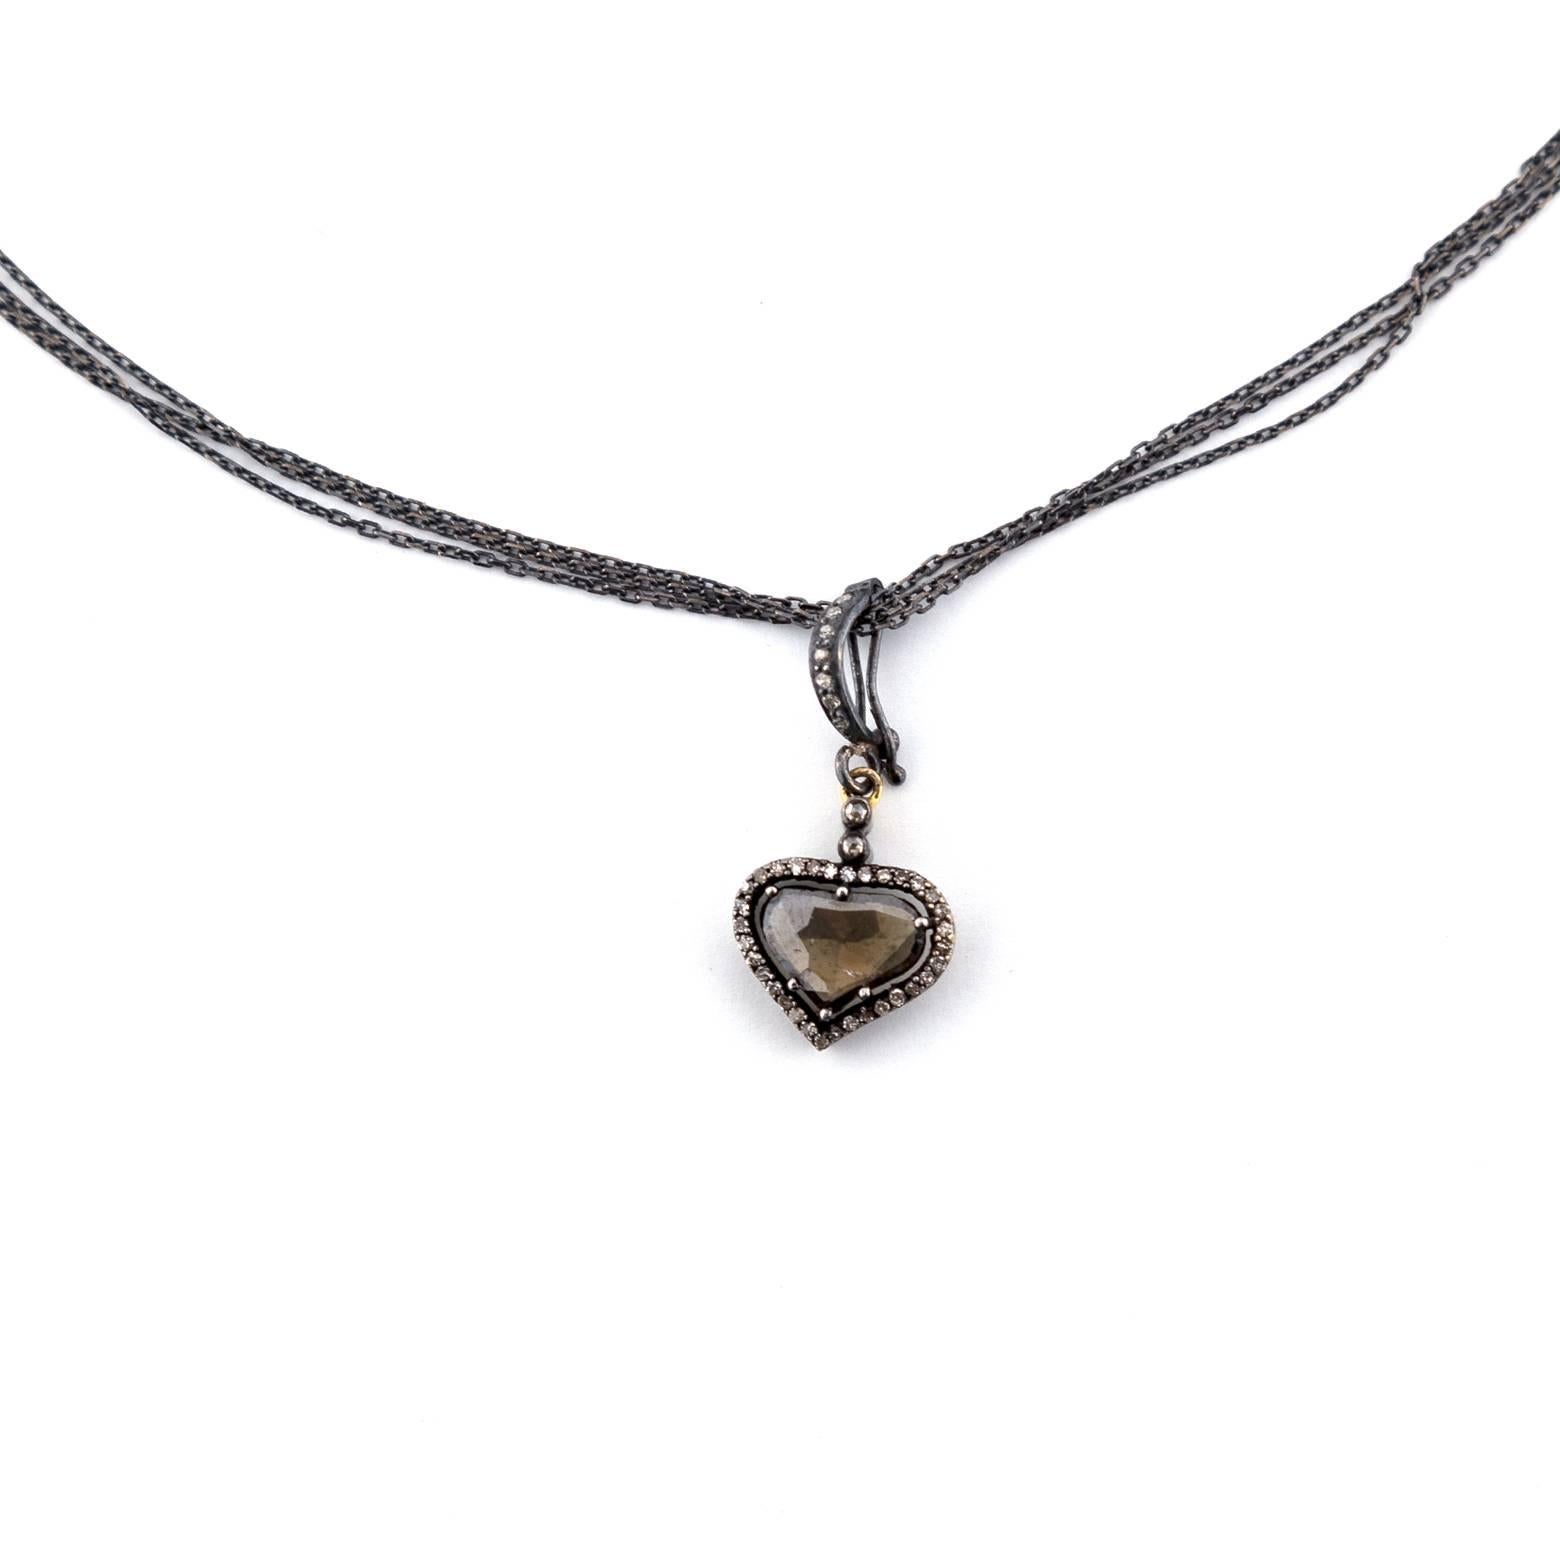 Oxidized Sterling Silver necklace with a heart-shaped ~2.75ct Diamond slice surrounded by a diamond bale. This piece is beautiful and you can take the pendant off to play with different styles. 